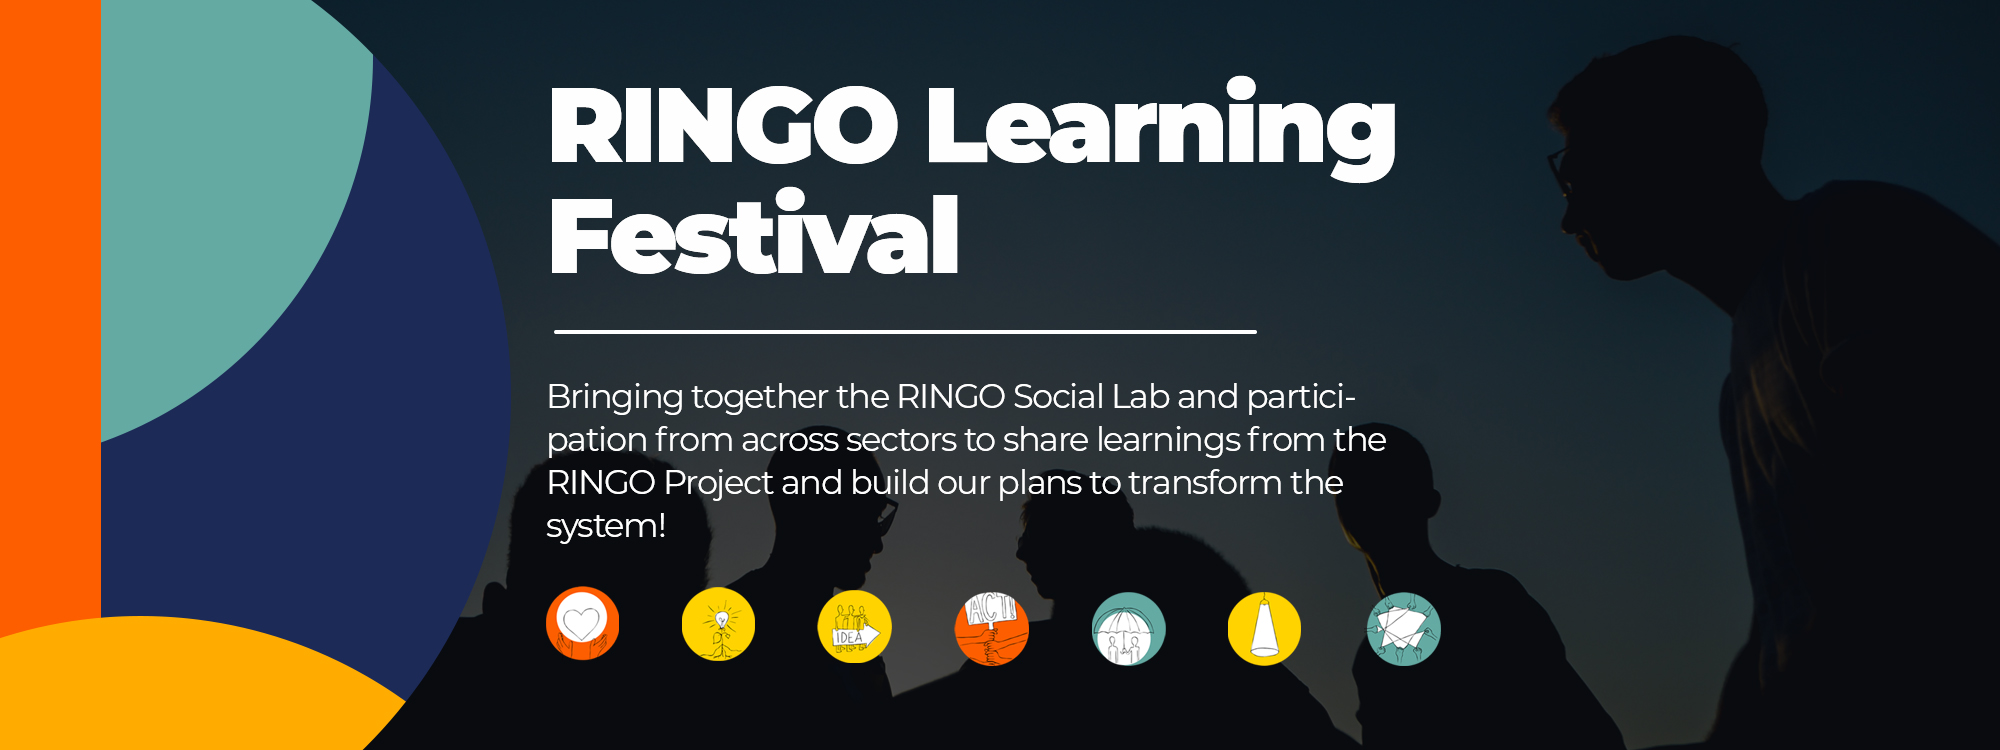 RINGO Learning Festival: Explore the Agenda and Watch the Recorded Sessions